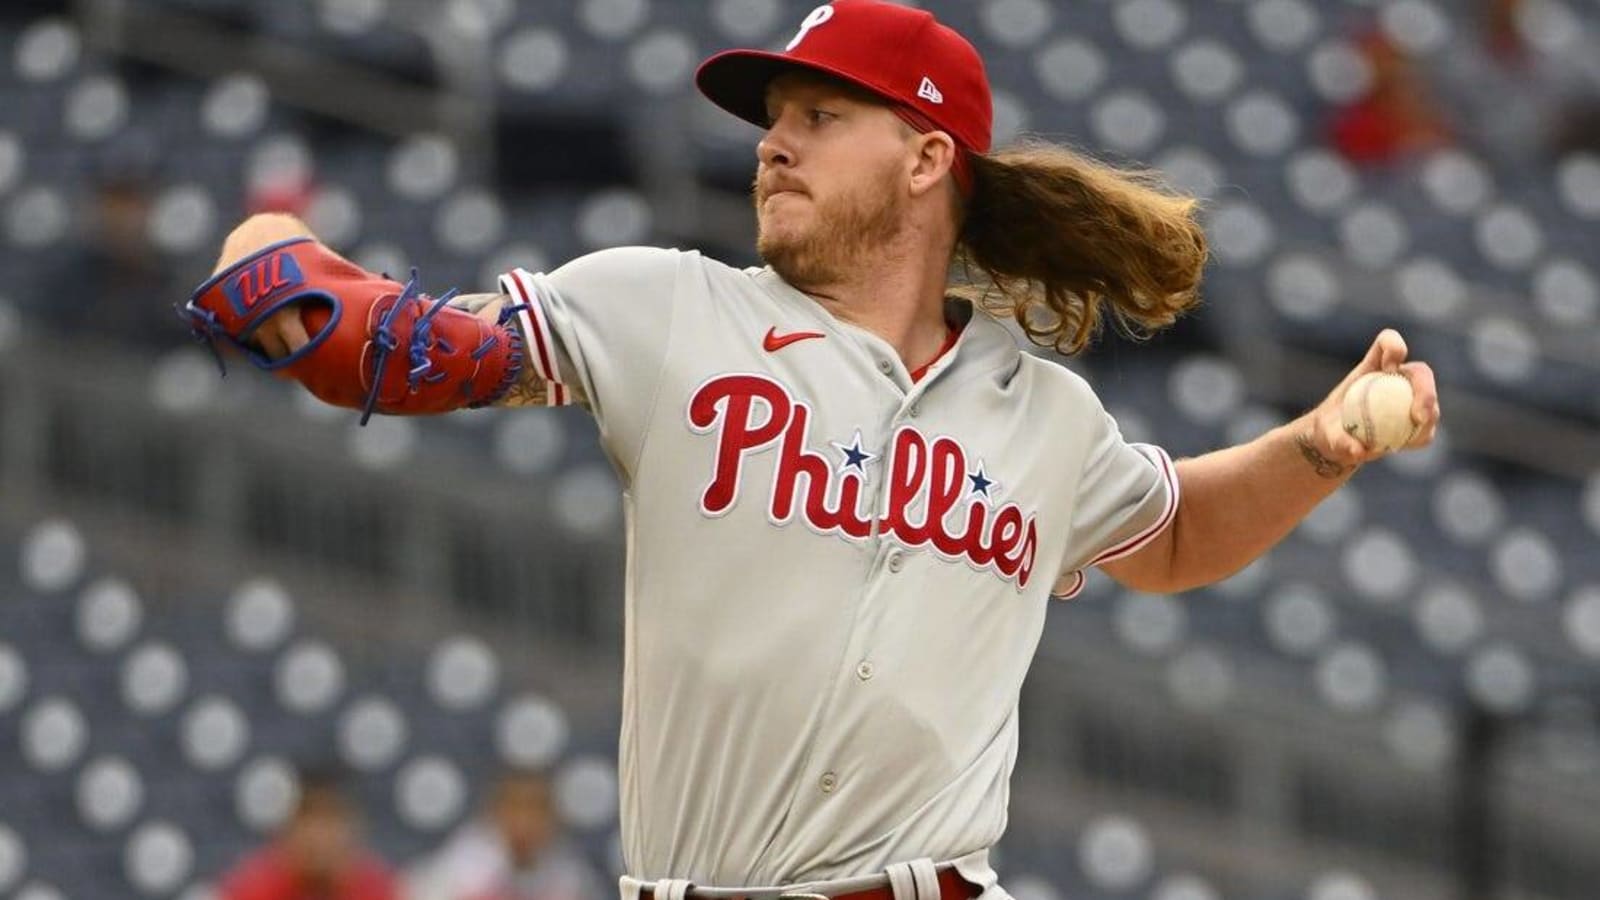 Phillies top Nationals in opener, help playoff chances